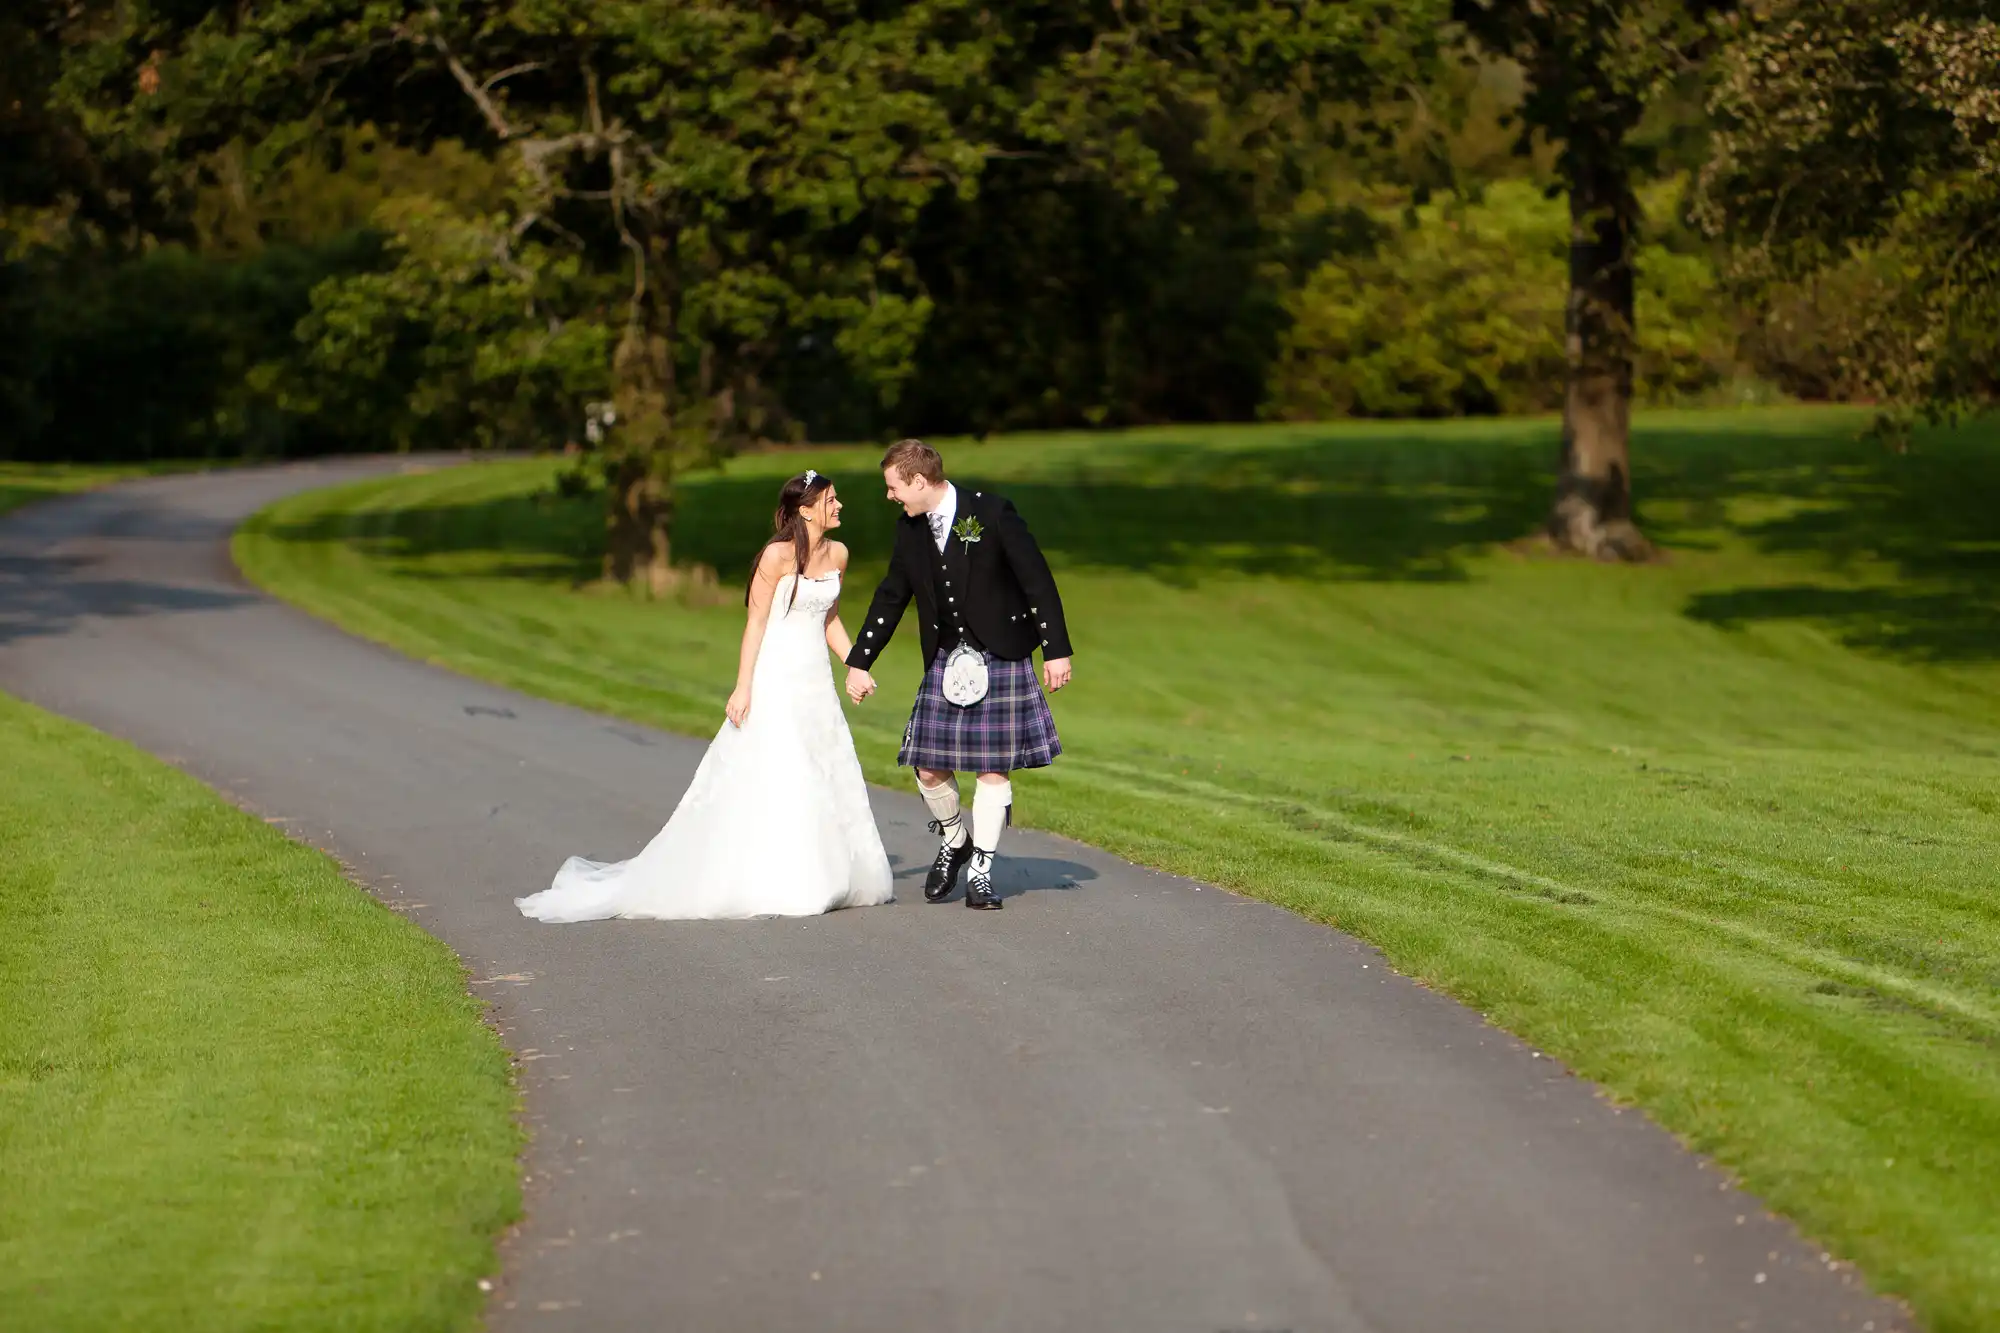 A bride in a white dress and a groom in a kilt walk hand in hand on a sunlit park pathway, sharing a kiss.